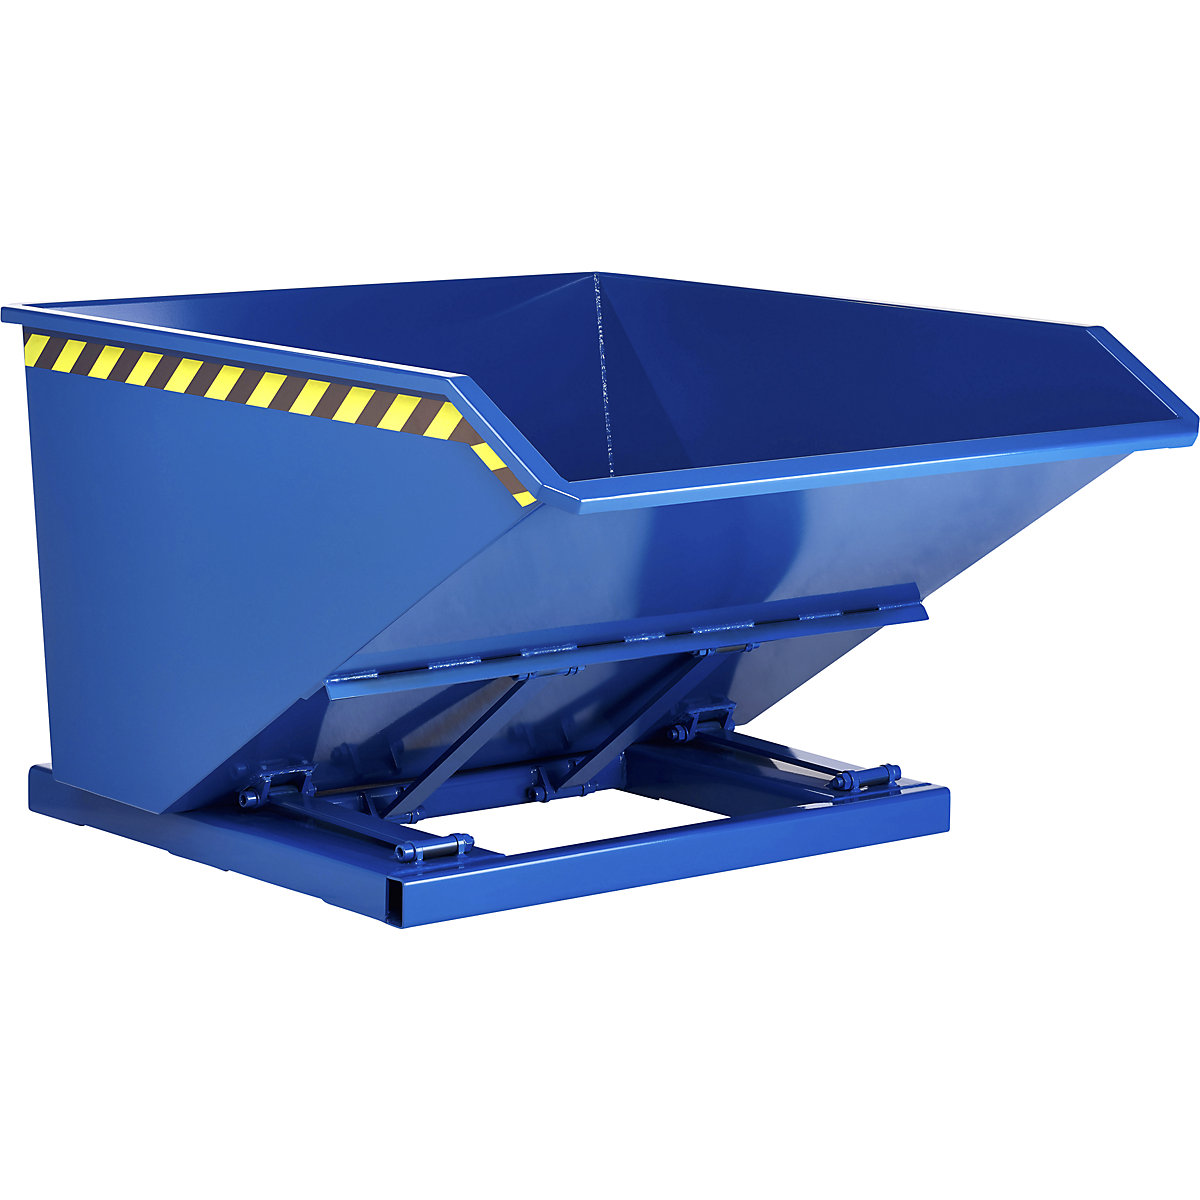 Tilting skip, low front edge height